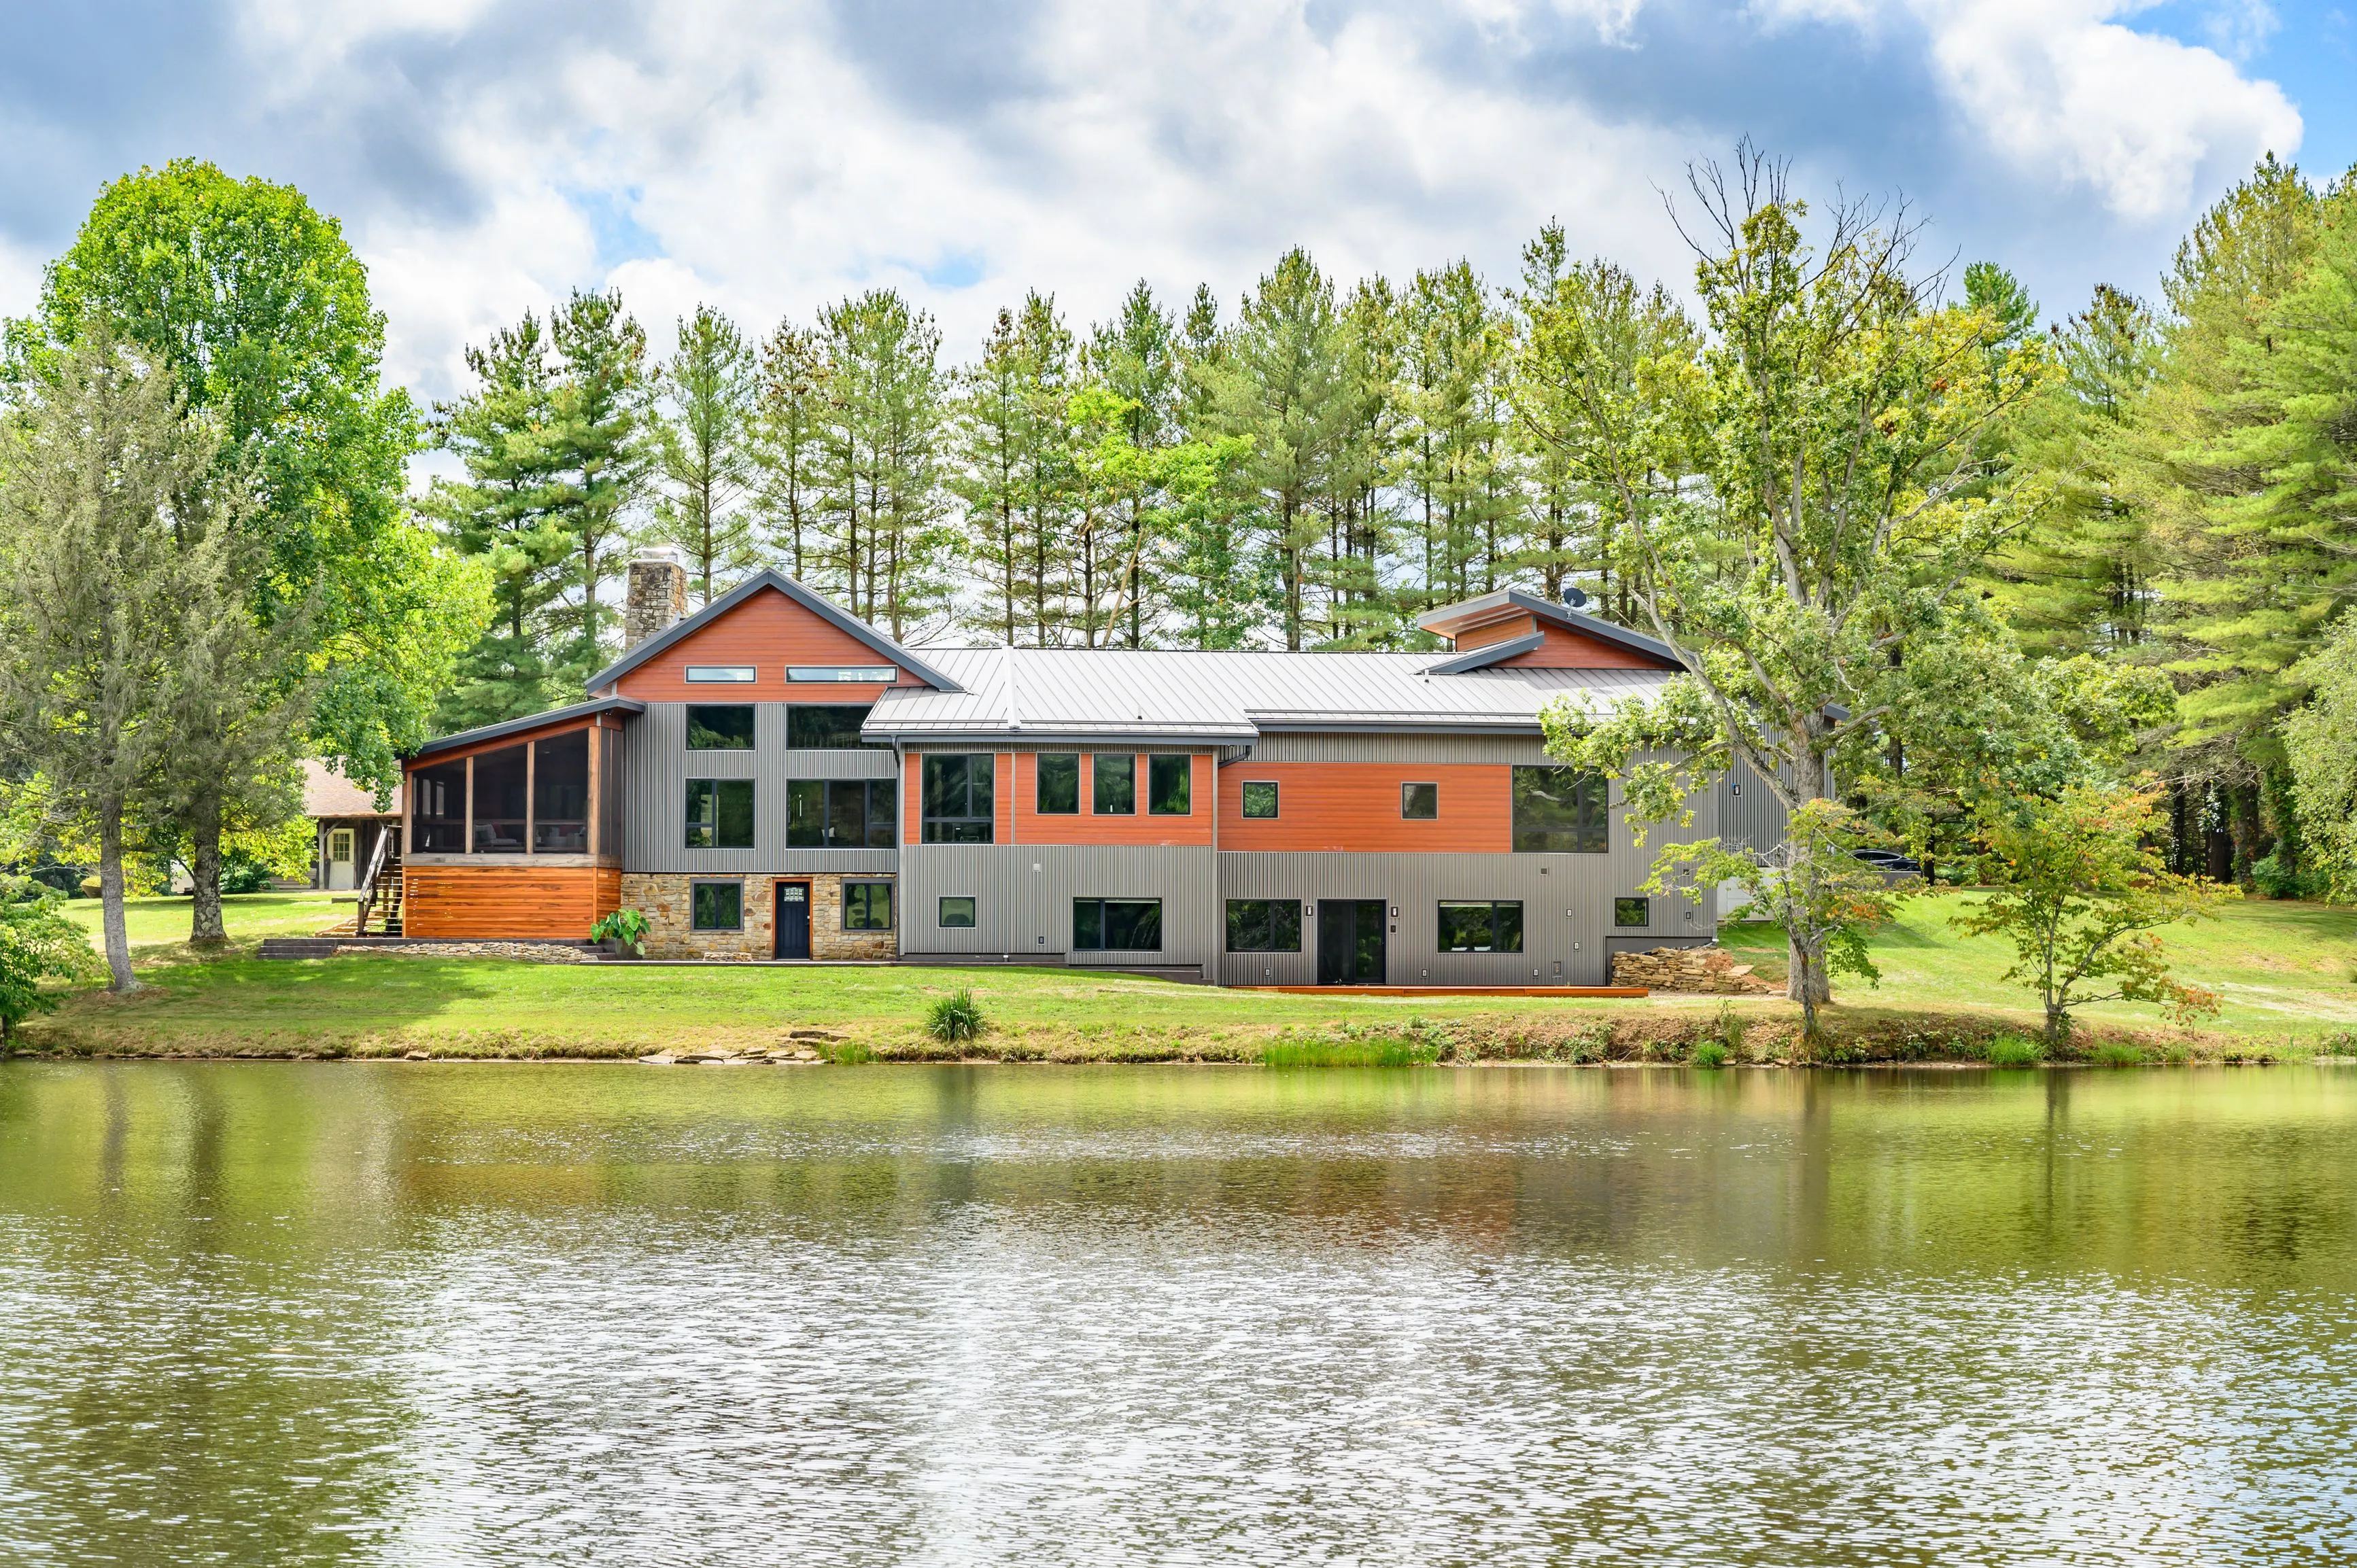 Modern multi-story house with large windows and a mix of wood and metal siding, situated by a pond surrounded by lush greenery.